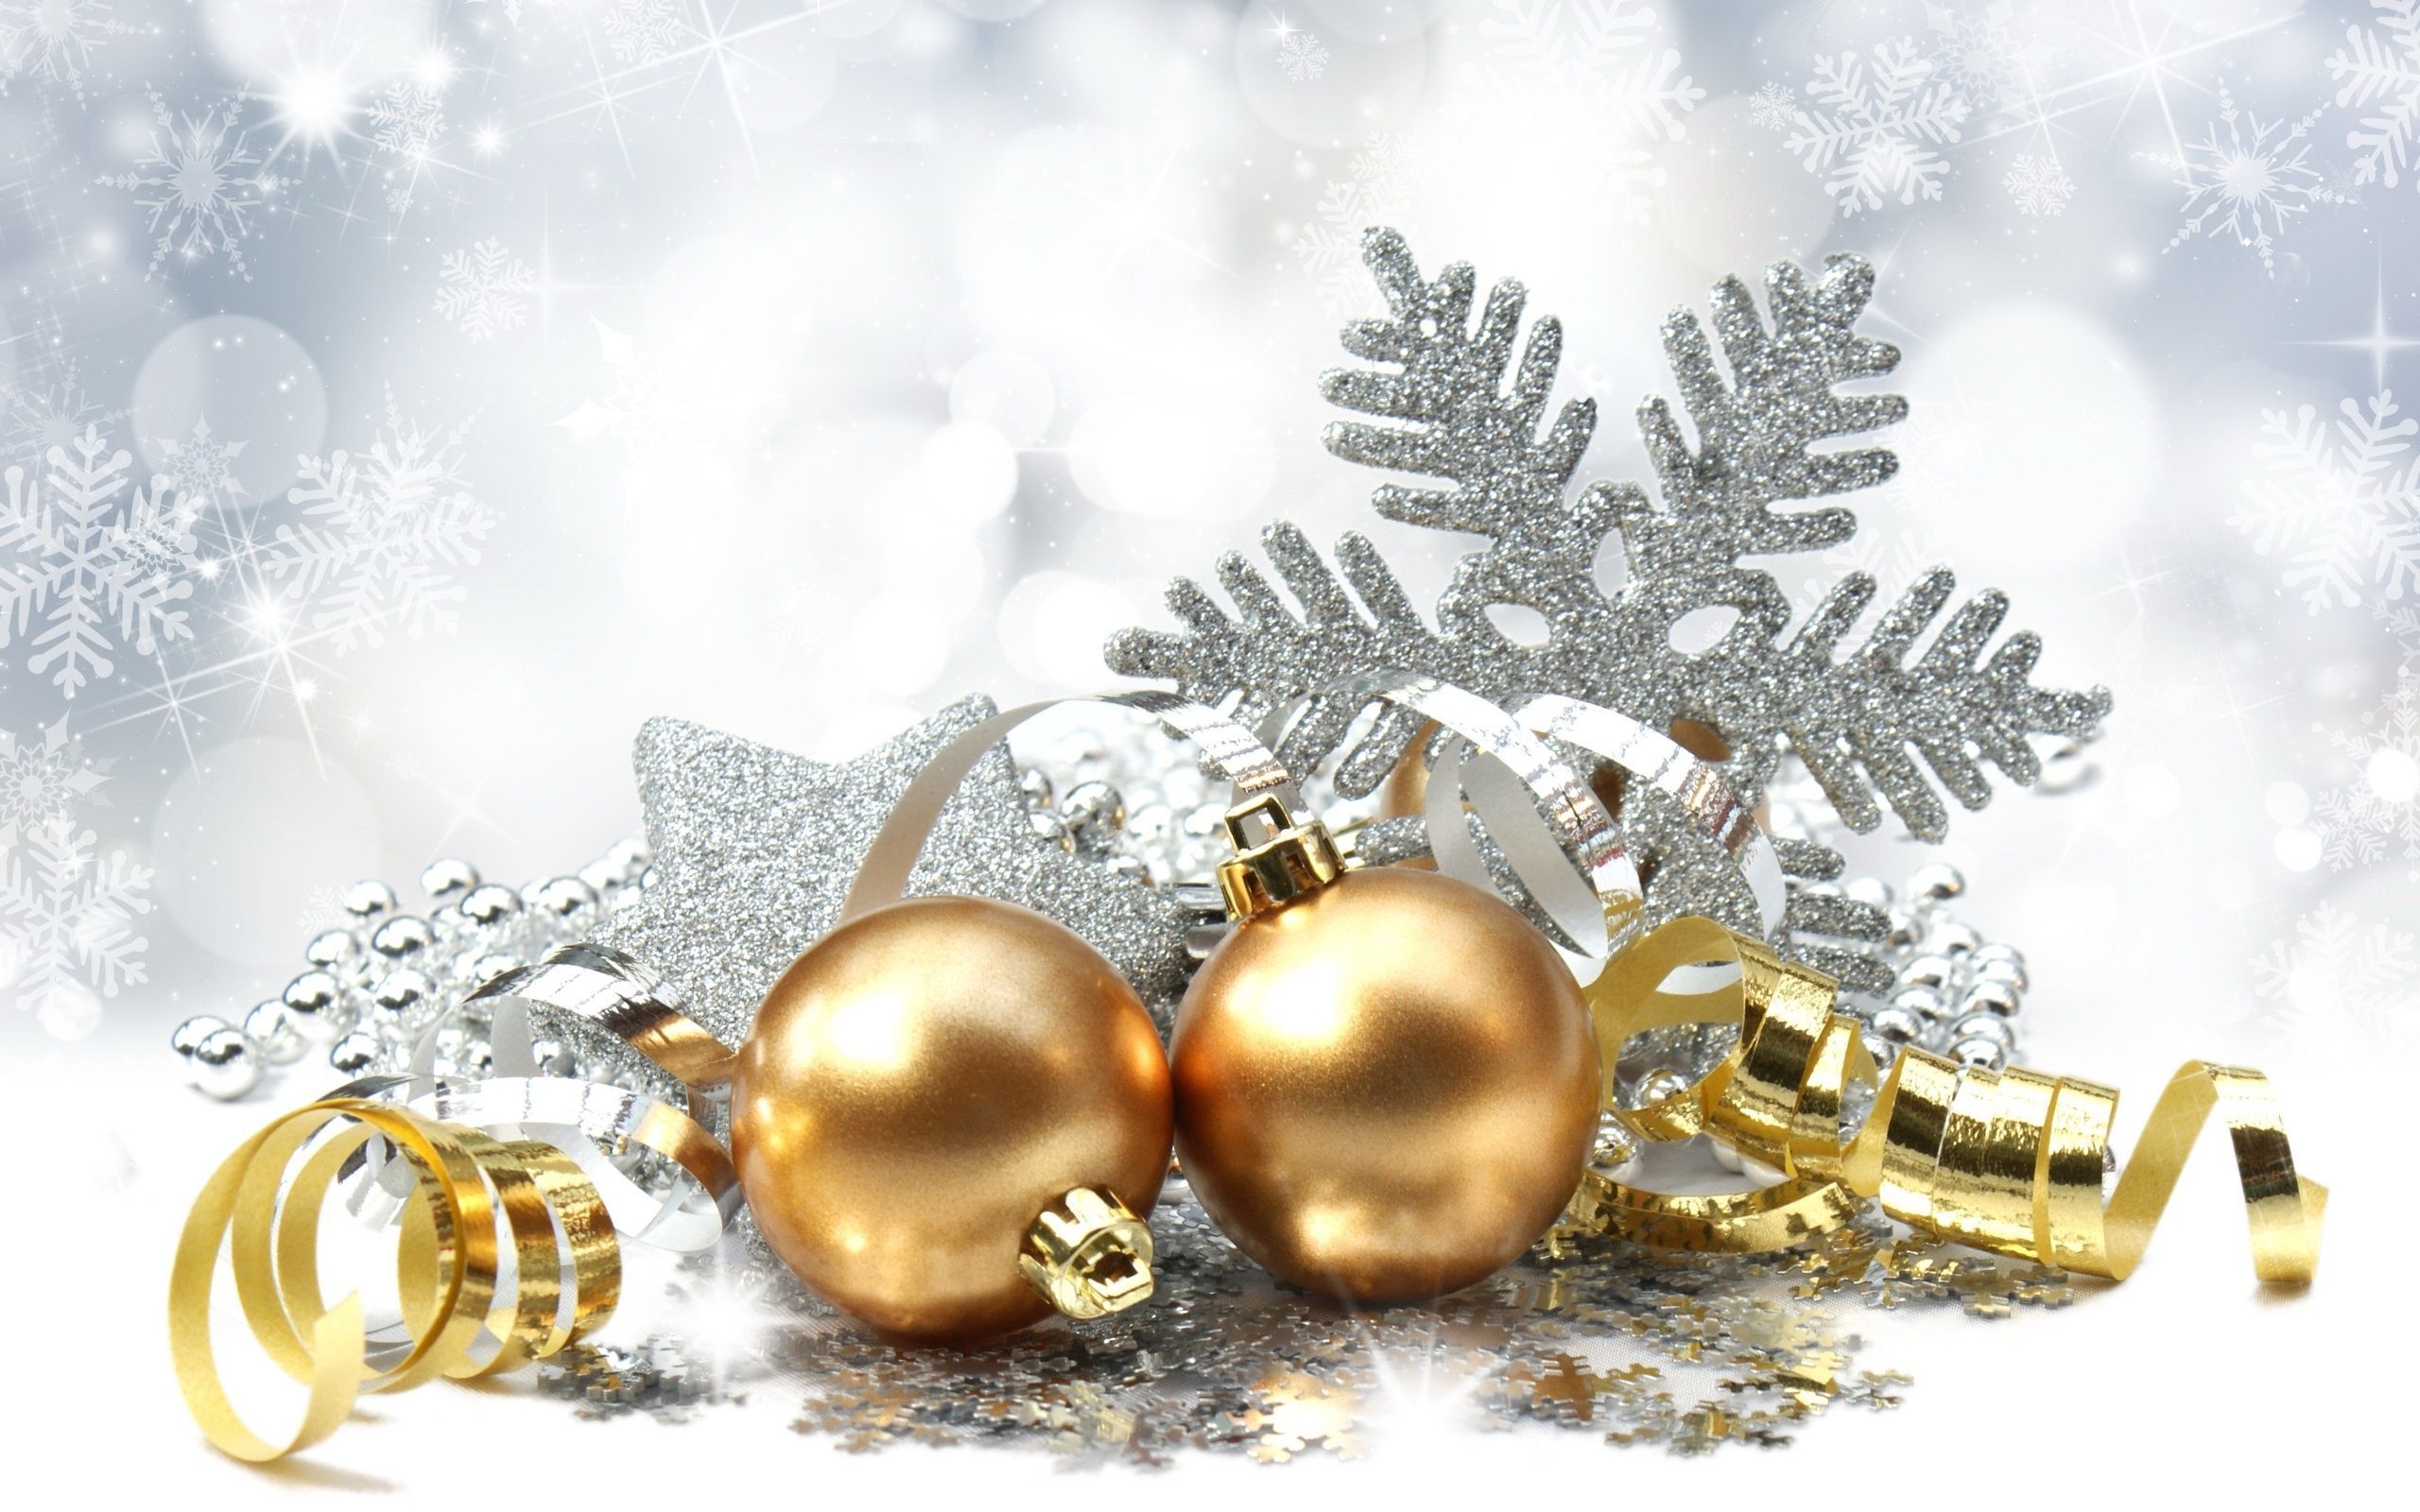 Gold Christmas Decorations Wallpaper HD. Wallpaper iphone christmas, Christmas wallpaper, Christmas lights background